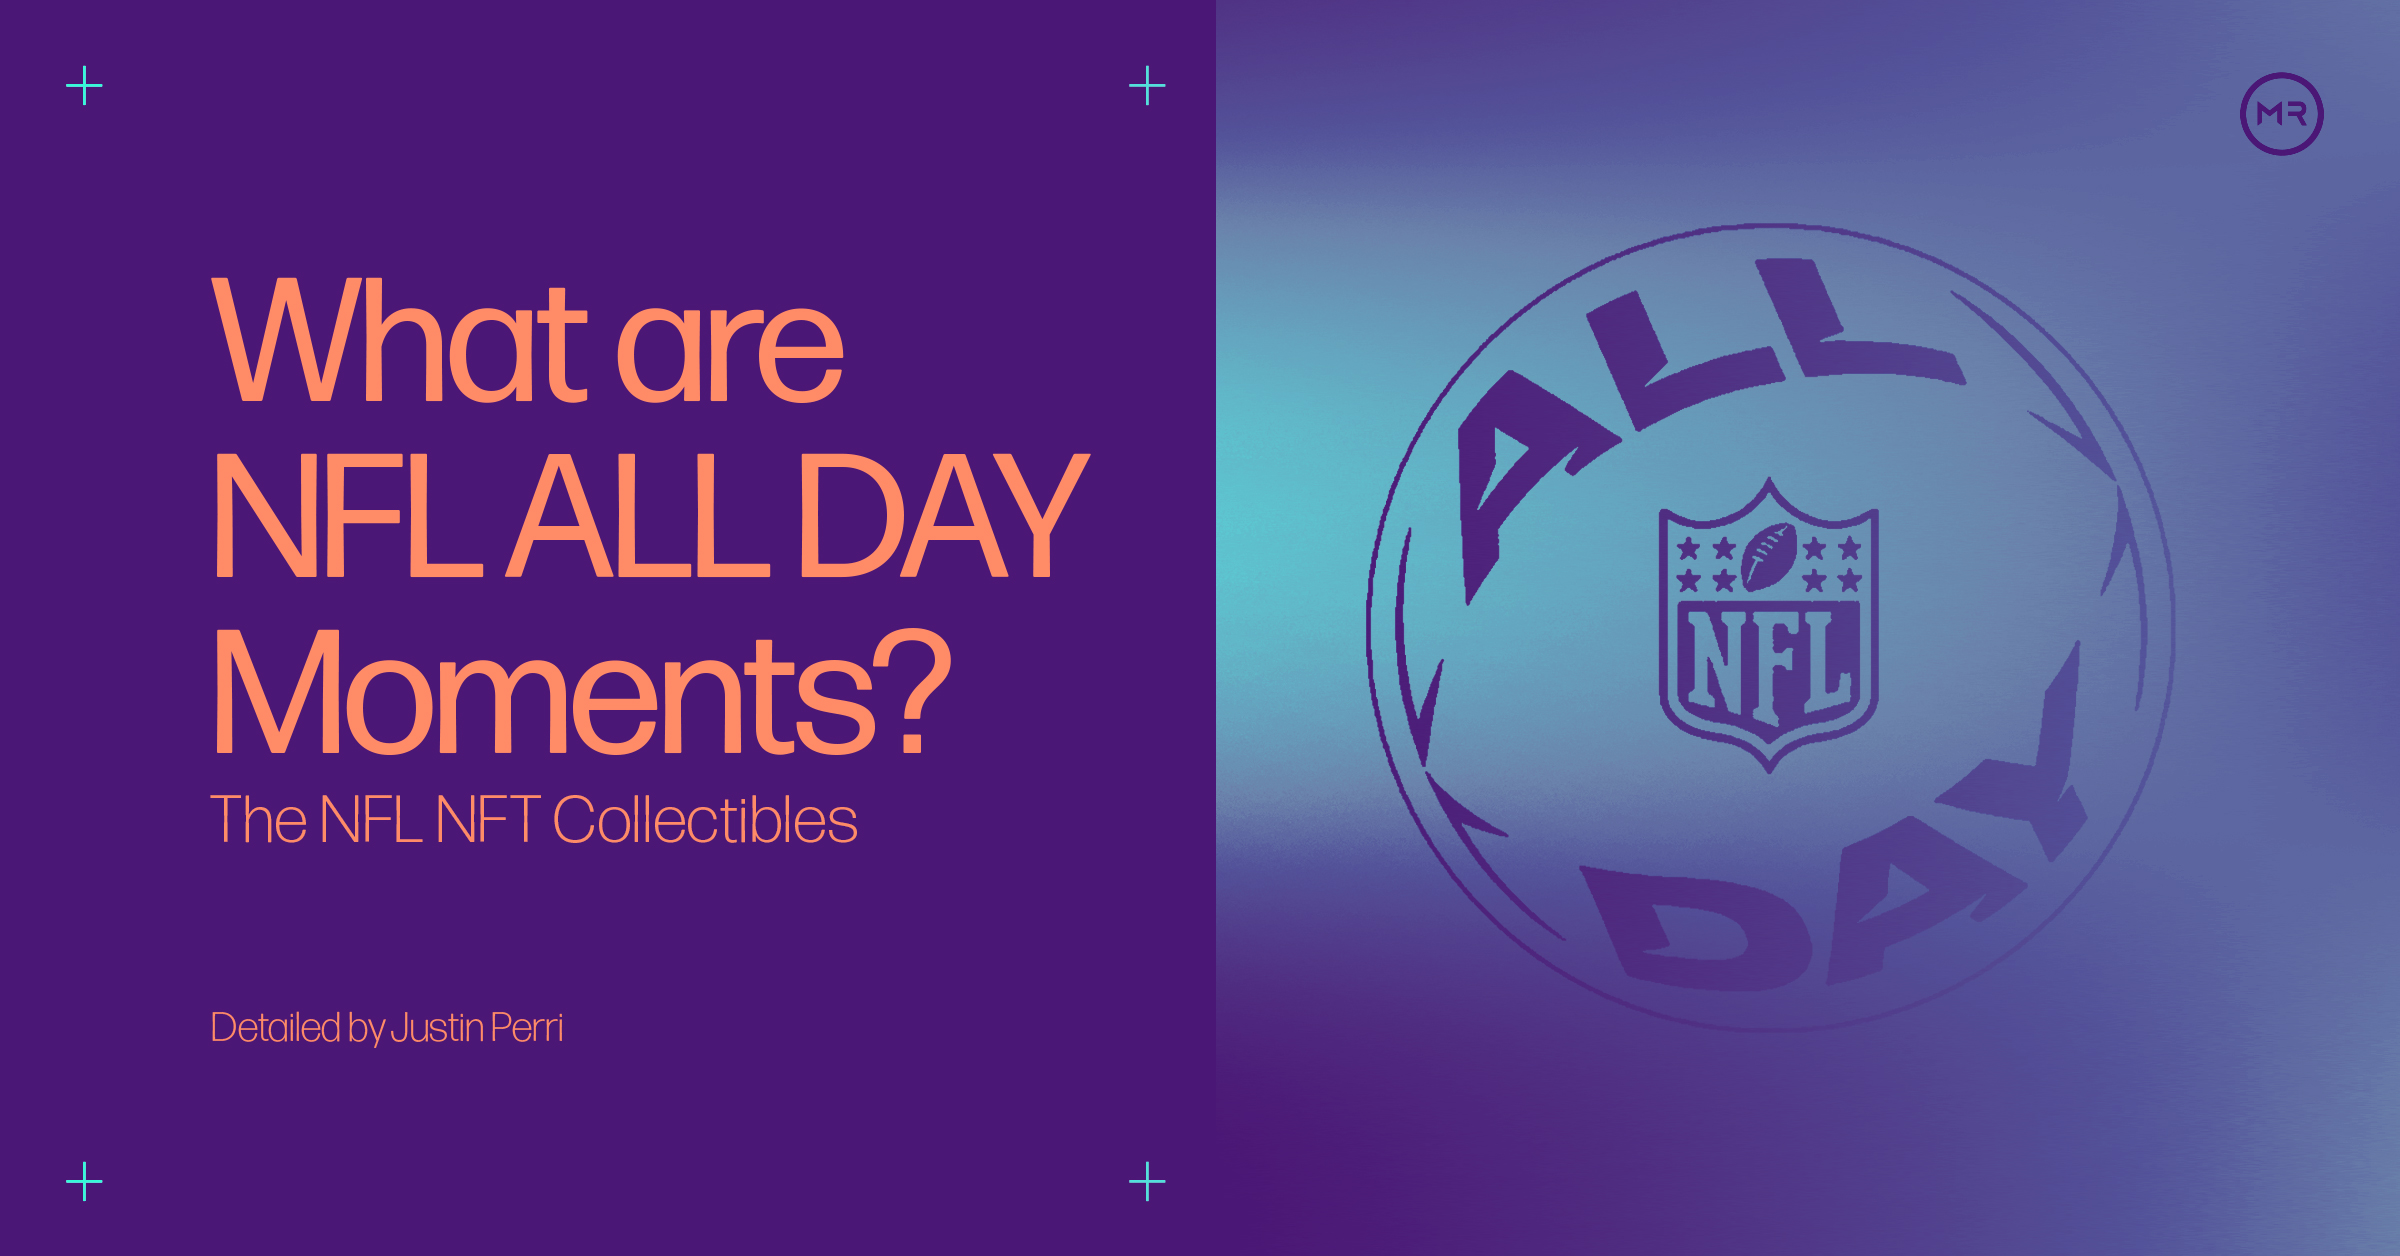 NFL All Day Moments Explained: The NFL NFT Collectibles